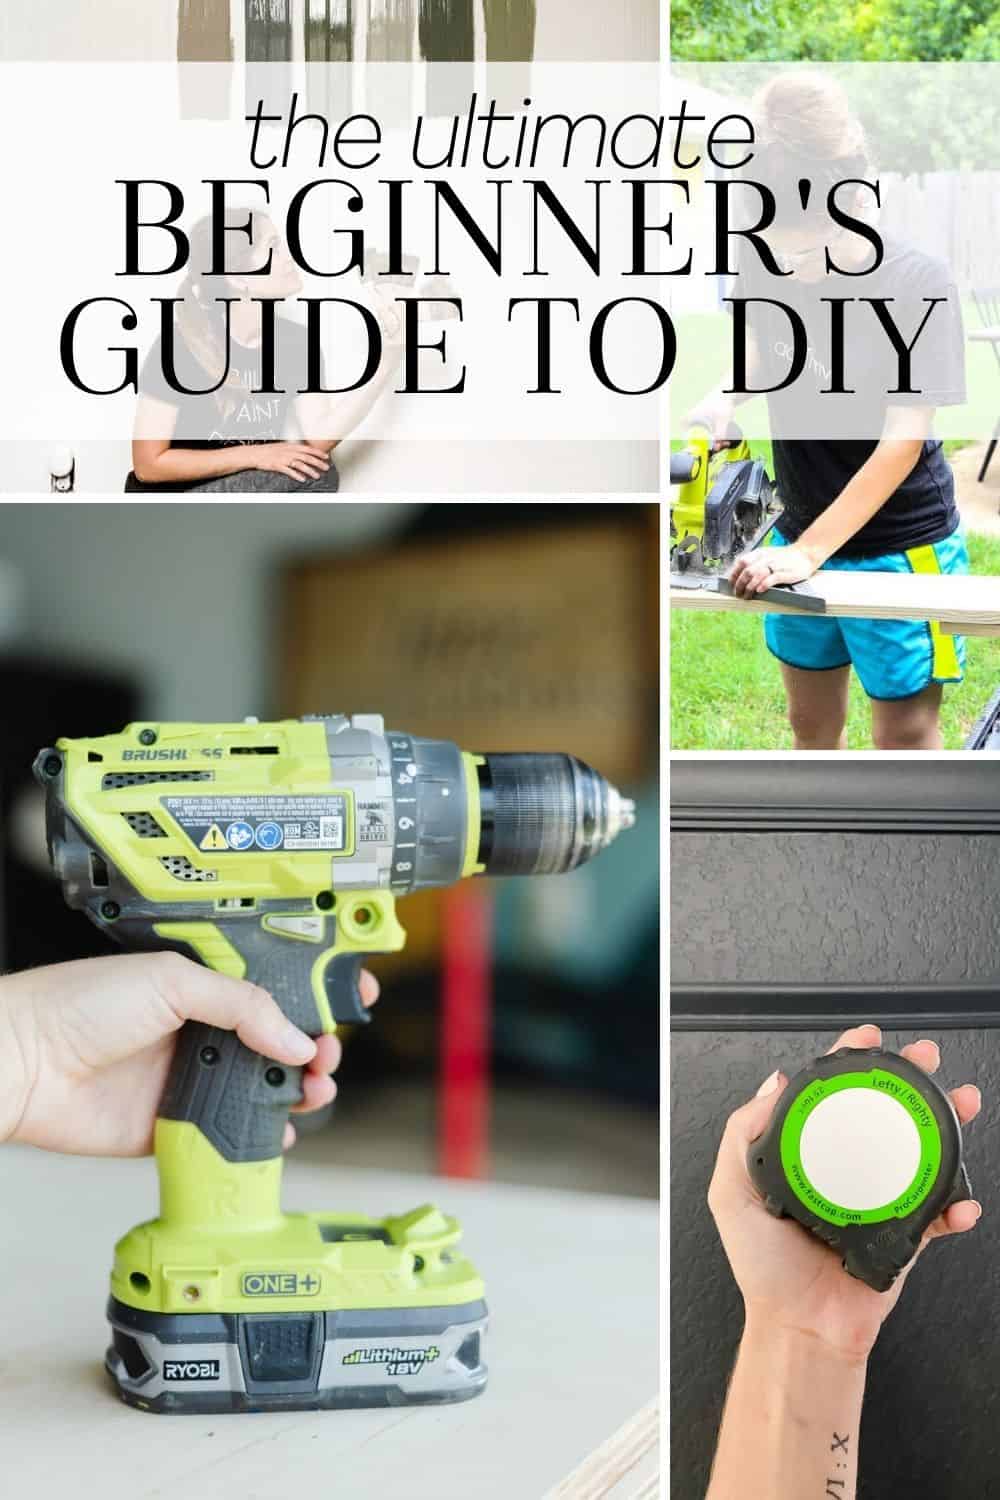 a collage of DIY-related images with text overlay - the ultimate beginner's guide to DIY